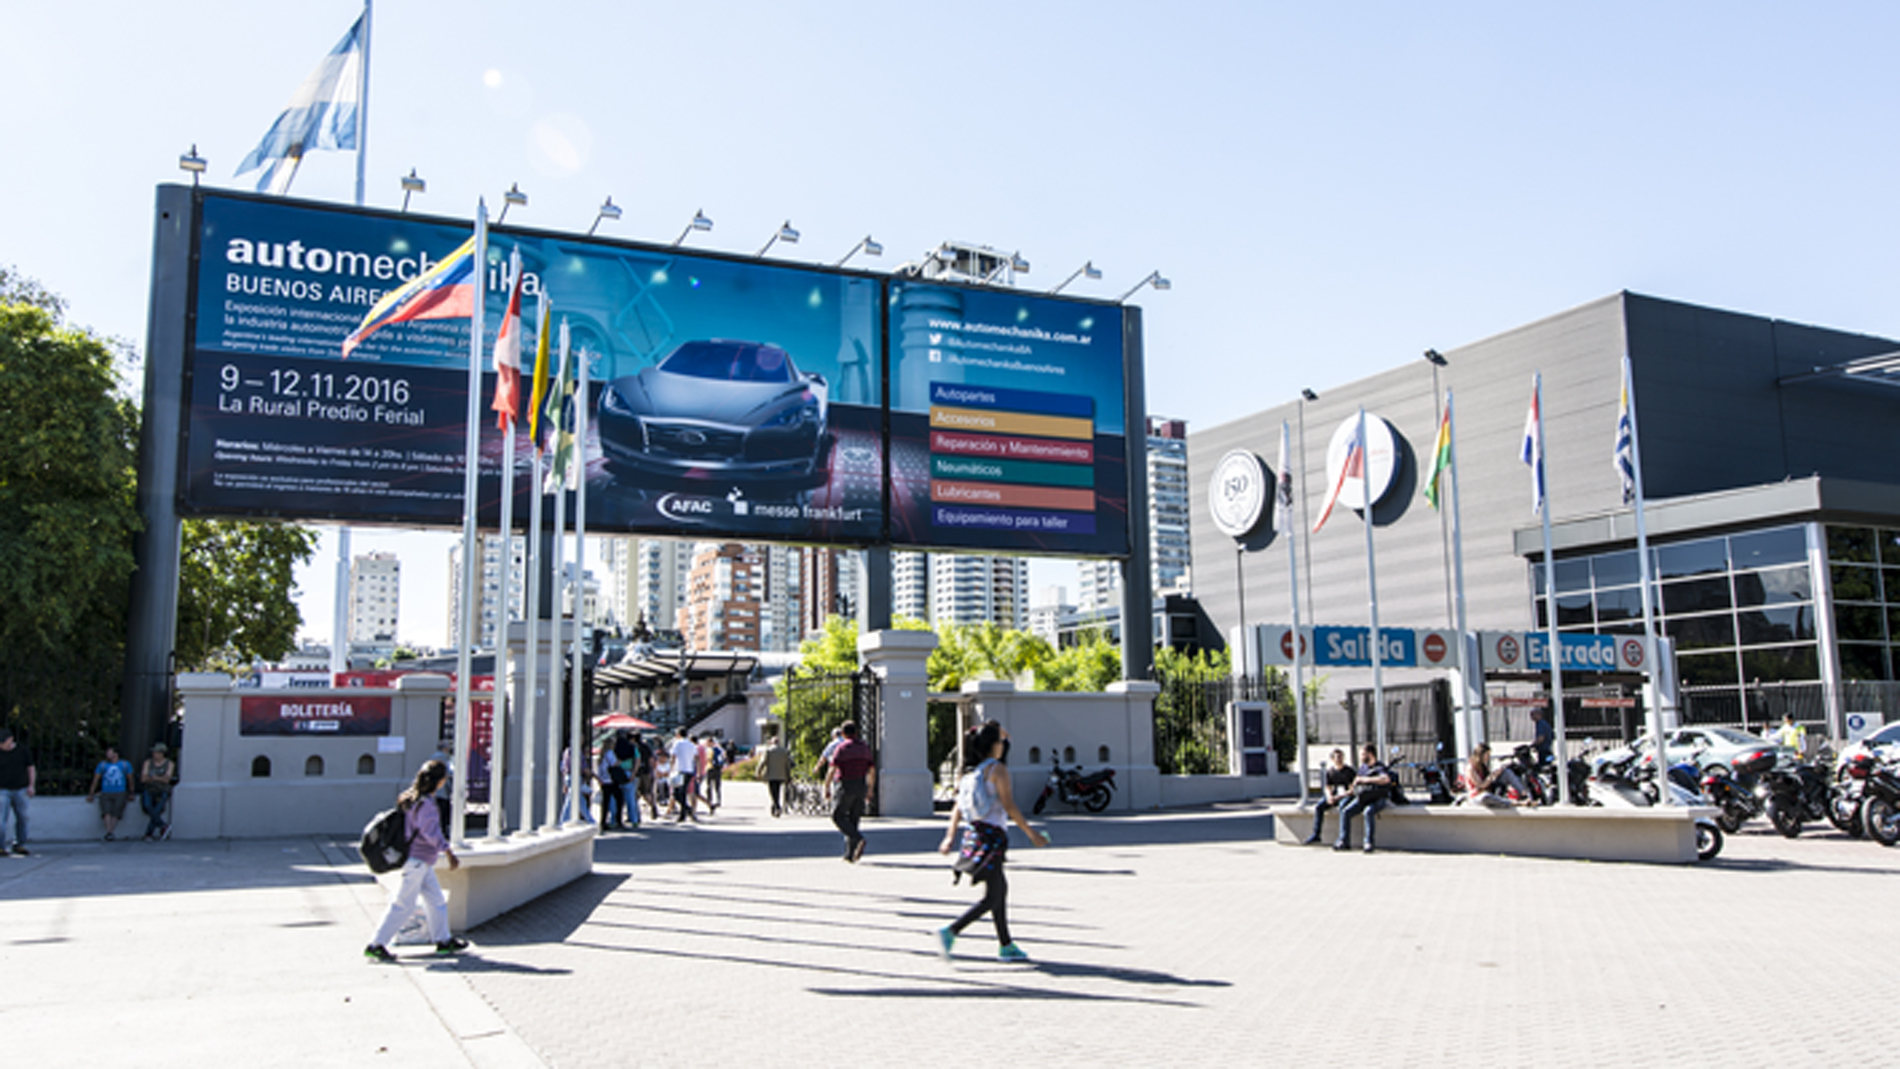 Access to the Automechanika Buenos Aires